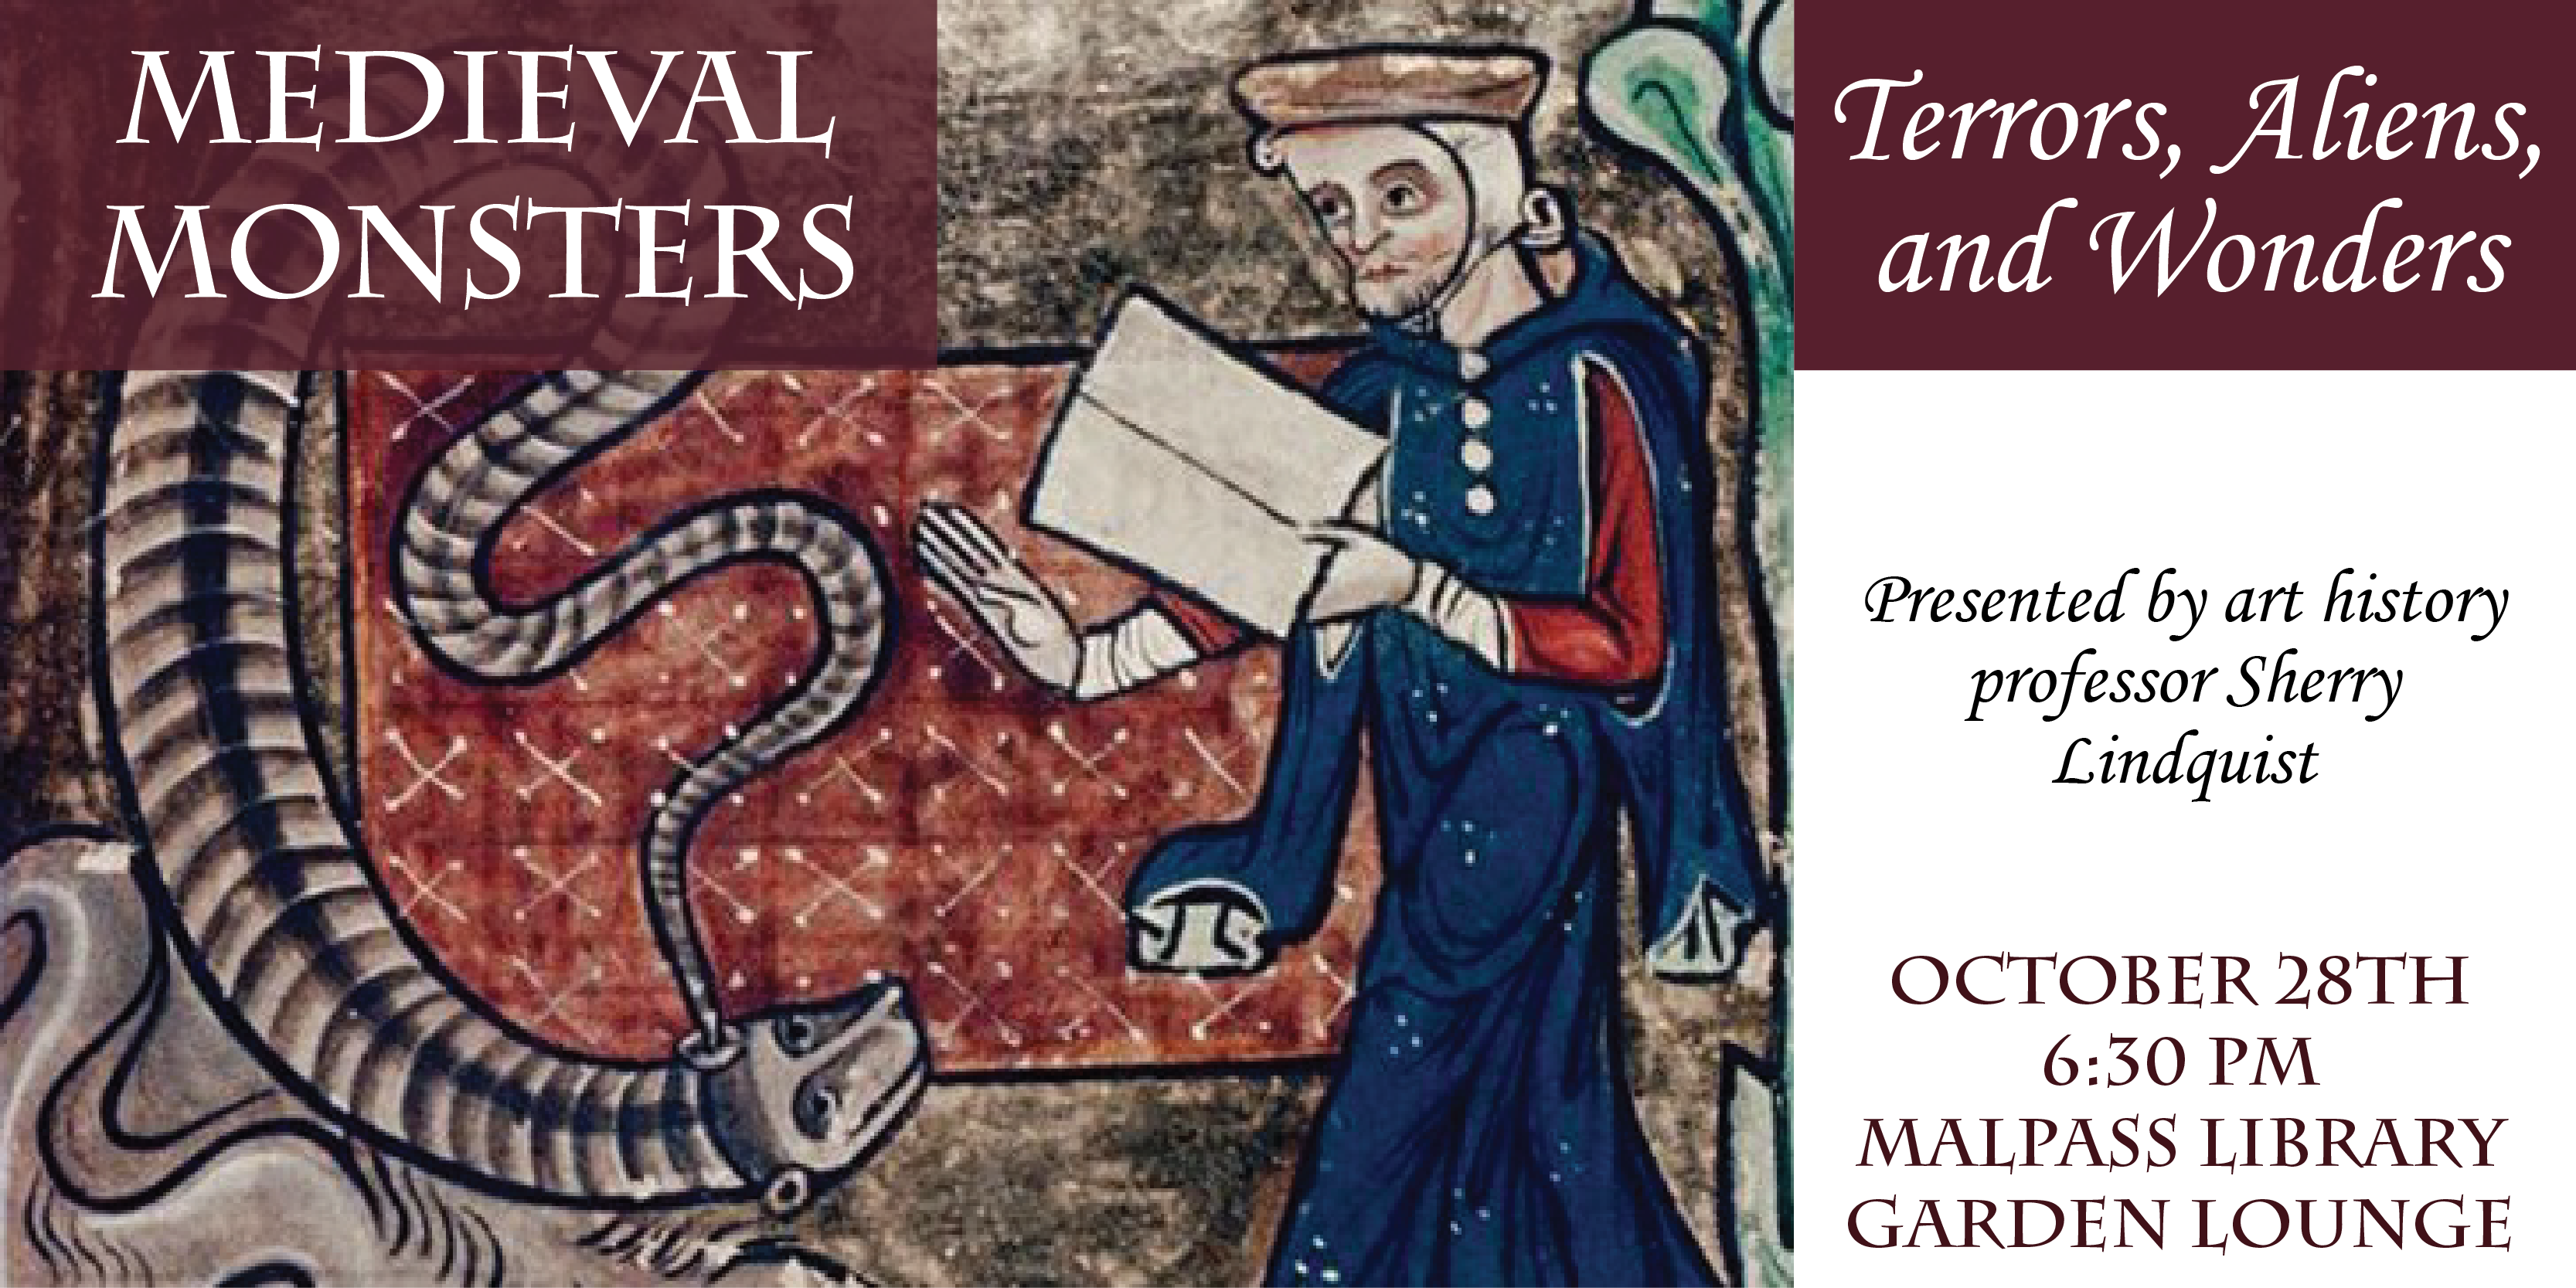 Artwork from medieval time period. Man holding a book with creature in foreground. Text about the event.